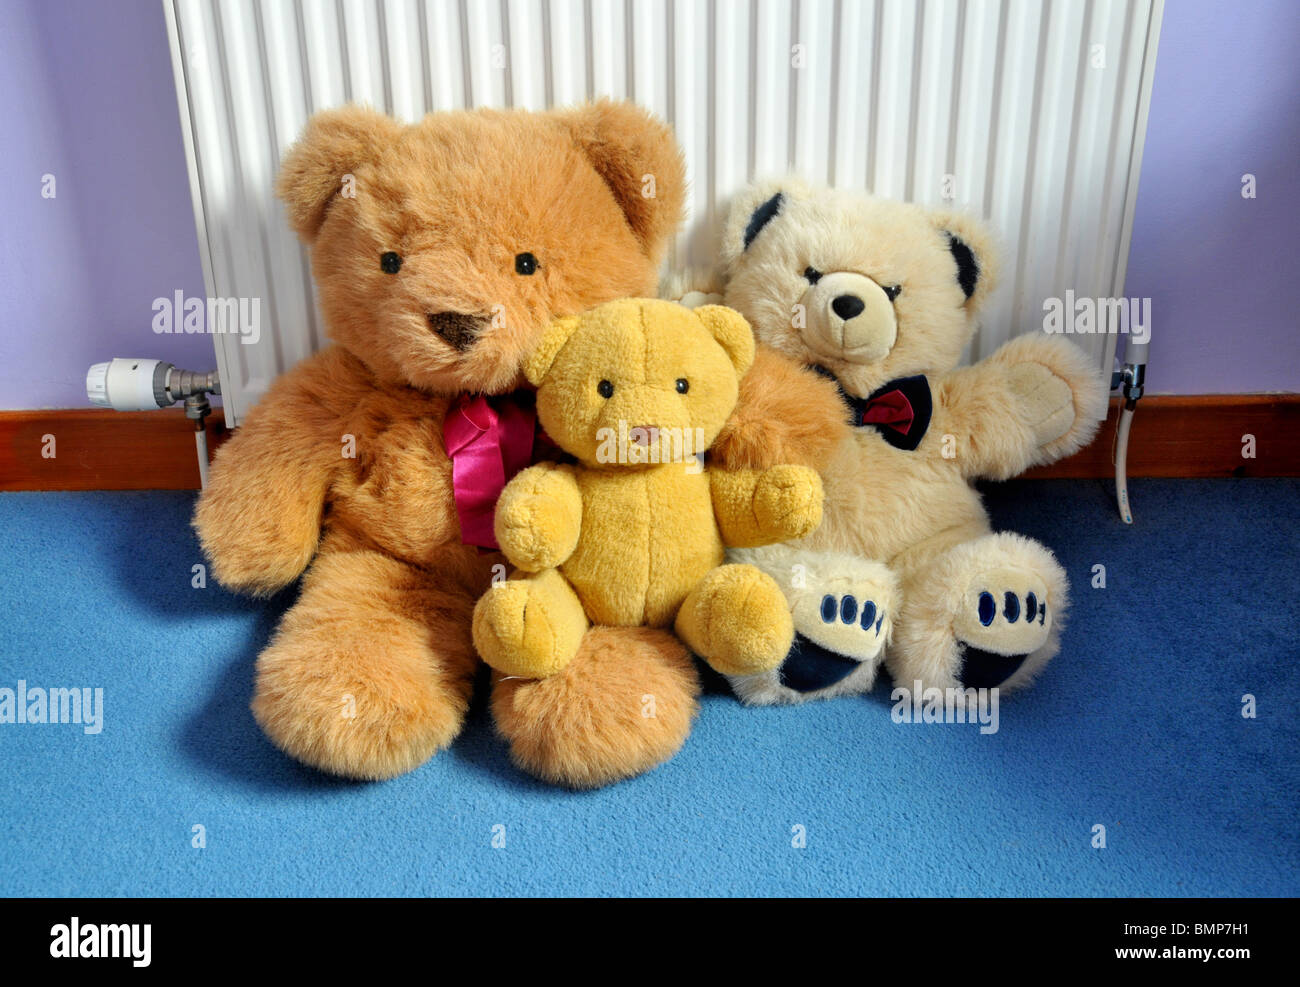 A family group of toy teddy bears sitting on the carpet and leaning against a radiator. Stock Photo